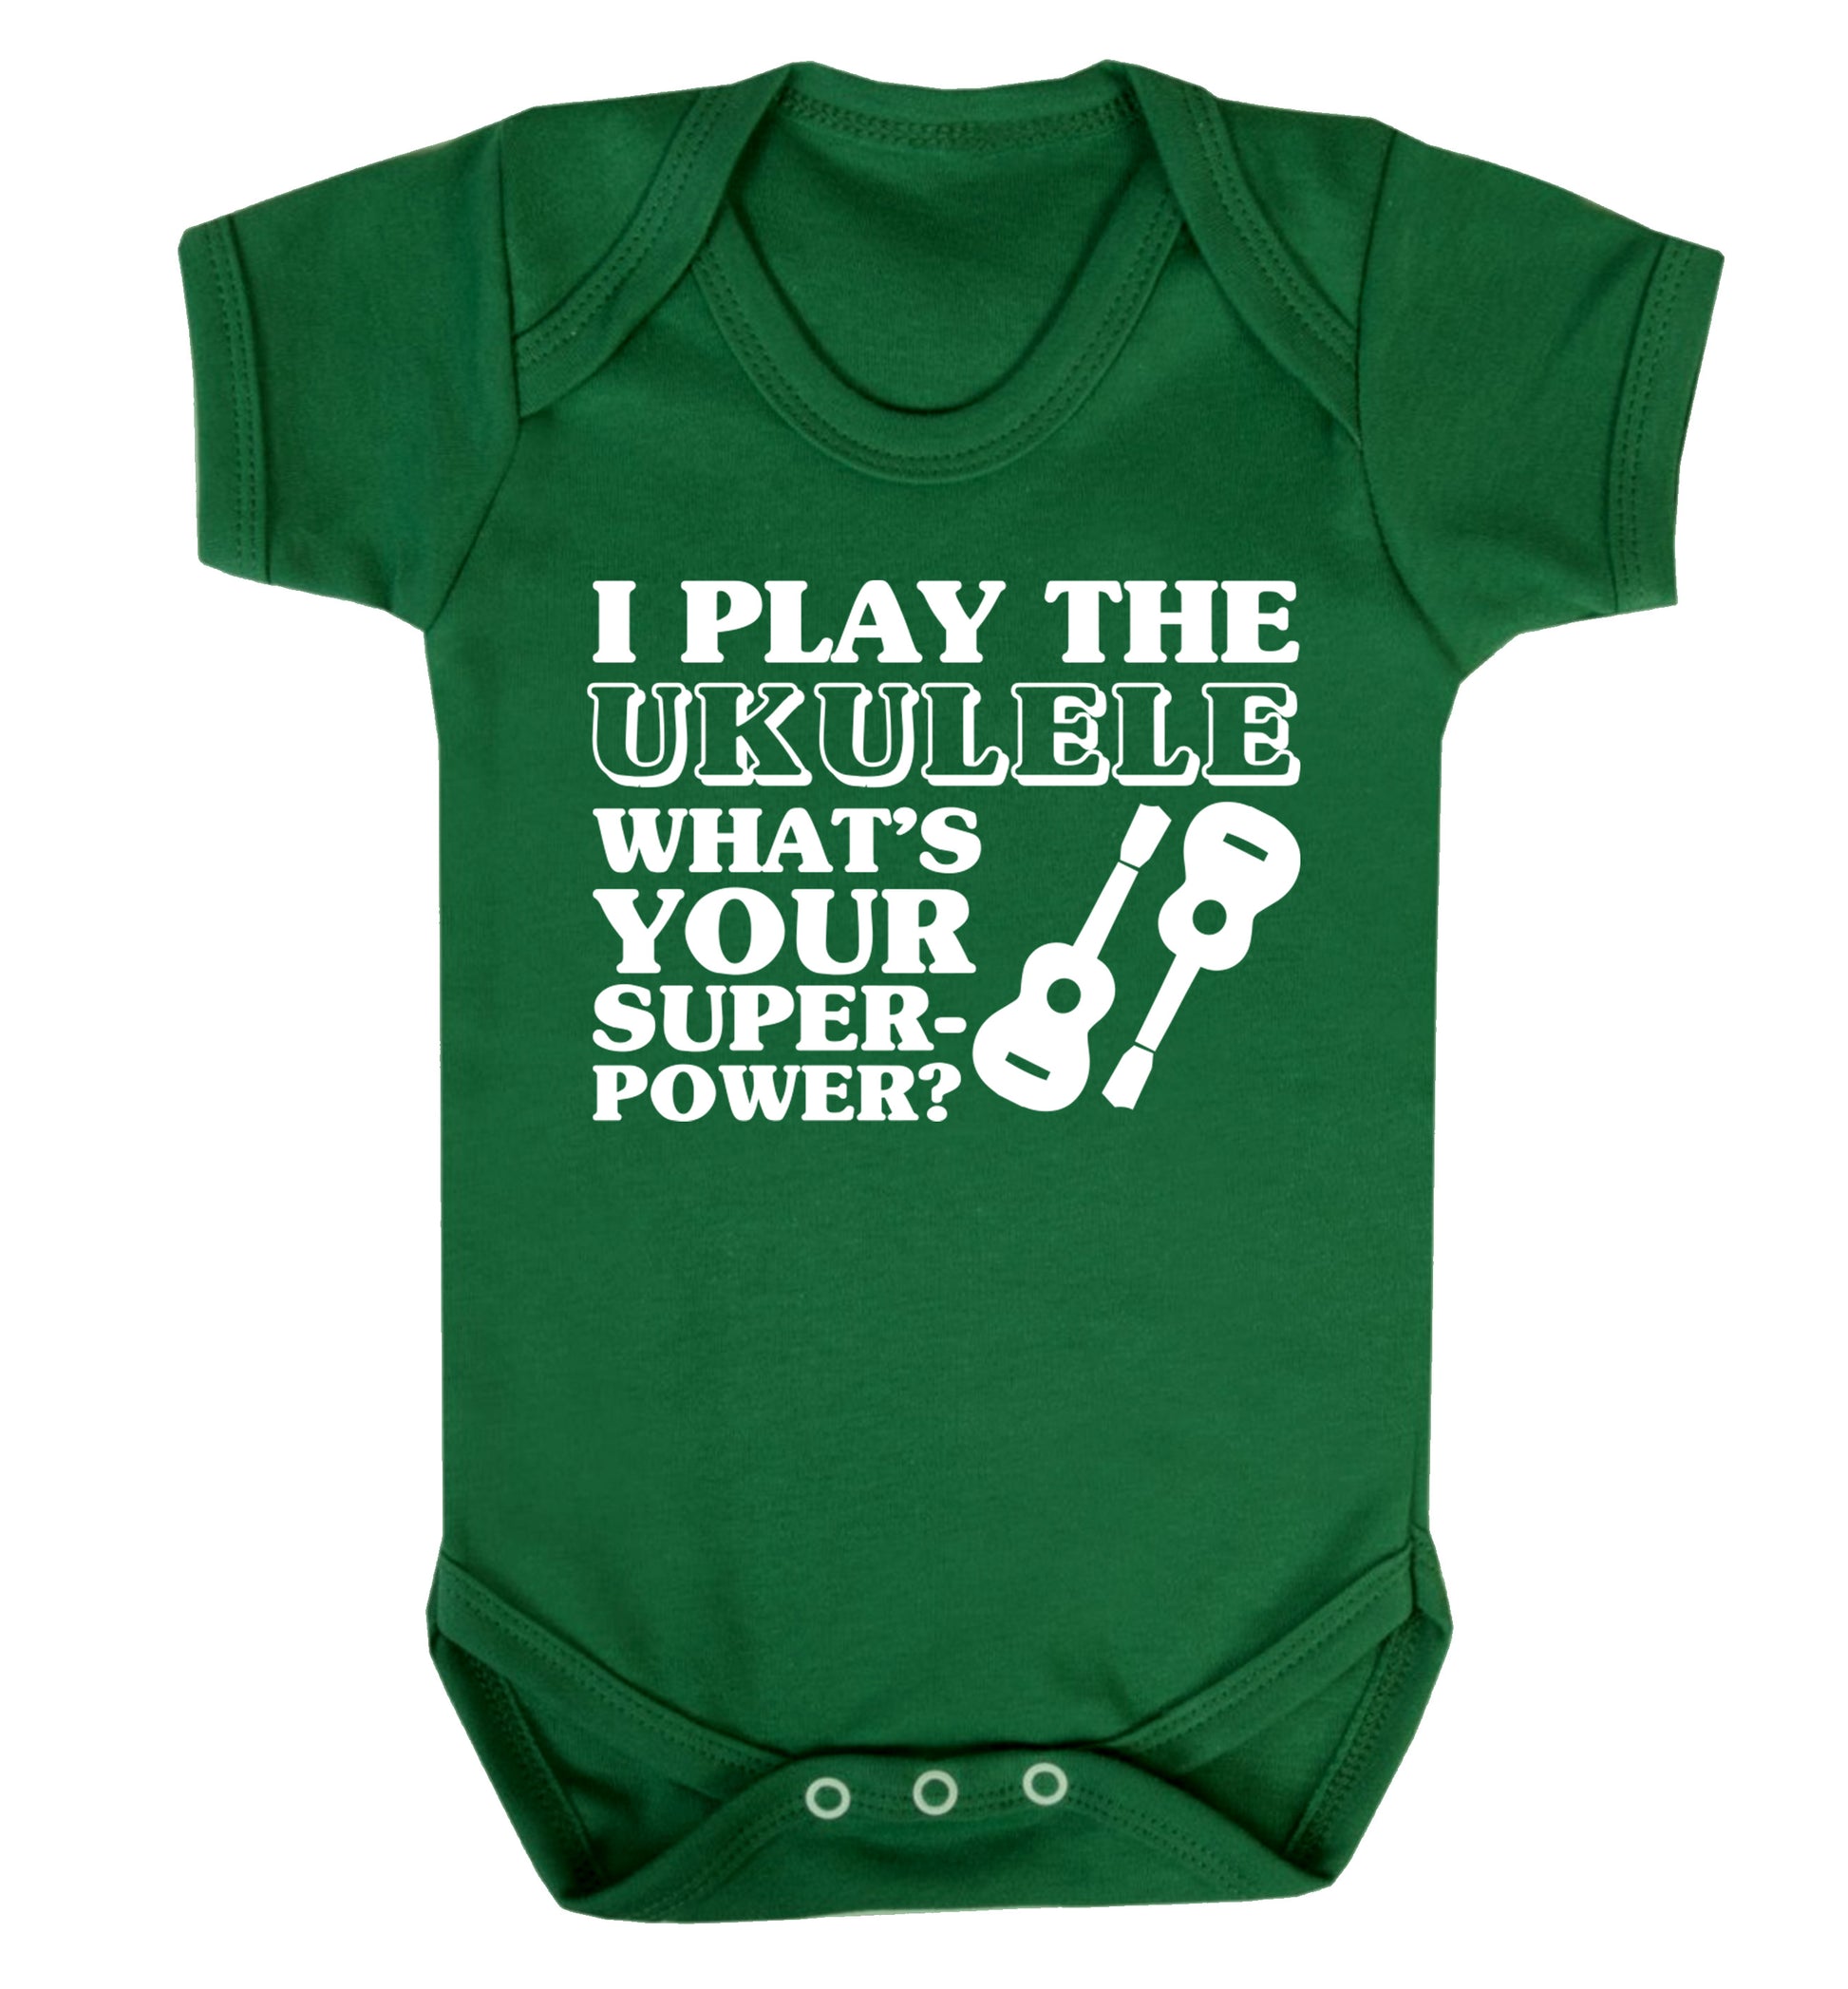 I play the ukulele what's your superpower? Baby Vest green 18-24 months